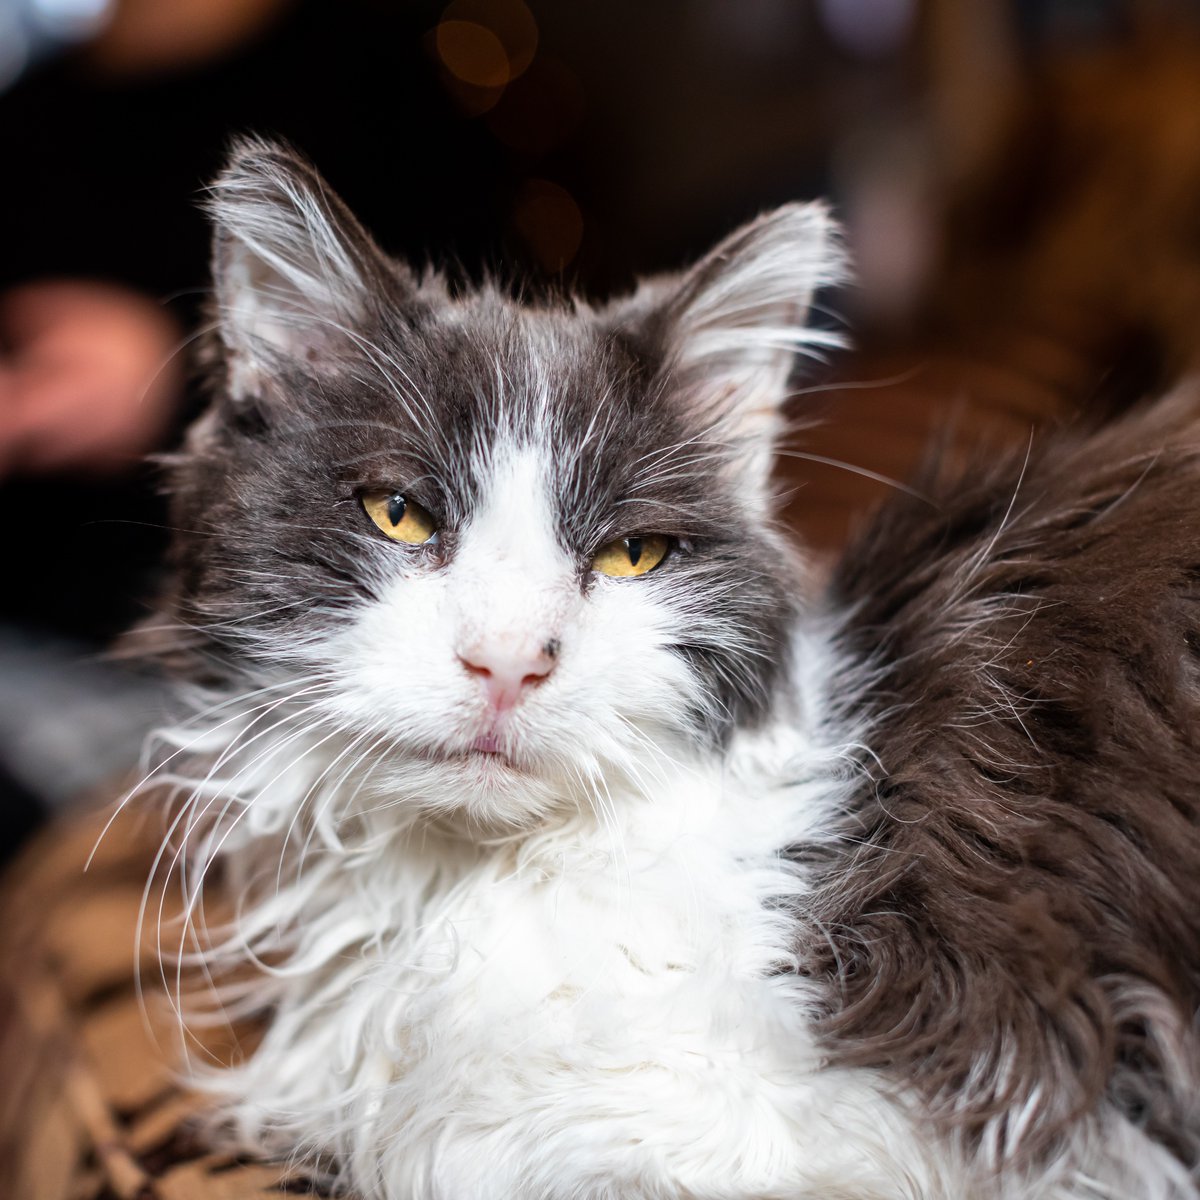 Have you or someone you know adopted an older cat from us? This June will be our fourth year celebrating #MatureMoggiesDay! We want to showcase some super seniors and their owners! For a chance to have your story featured, comment on your older cat adoption story below.